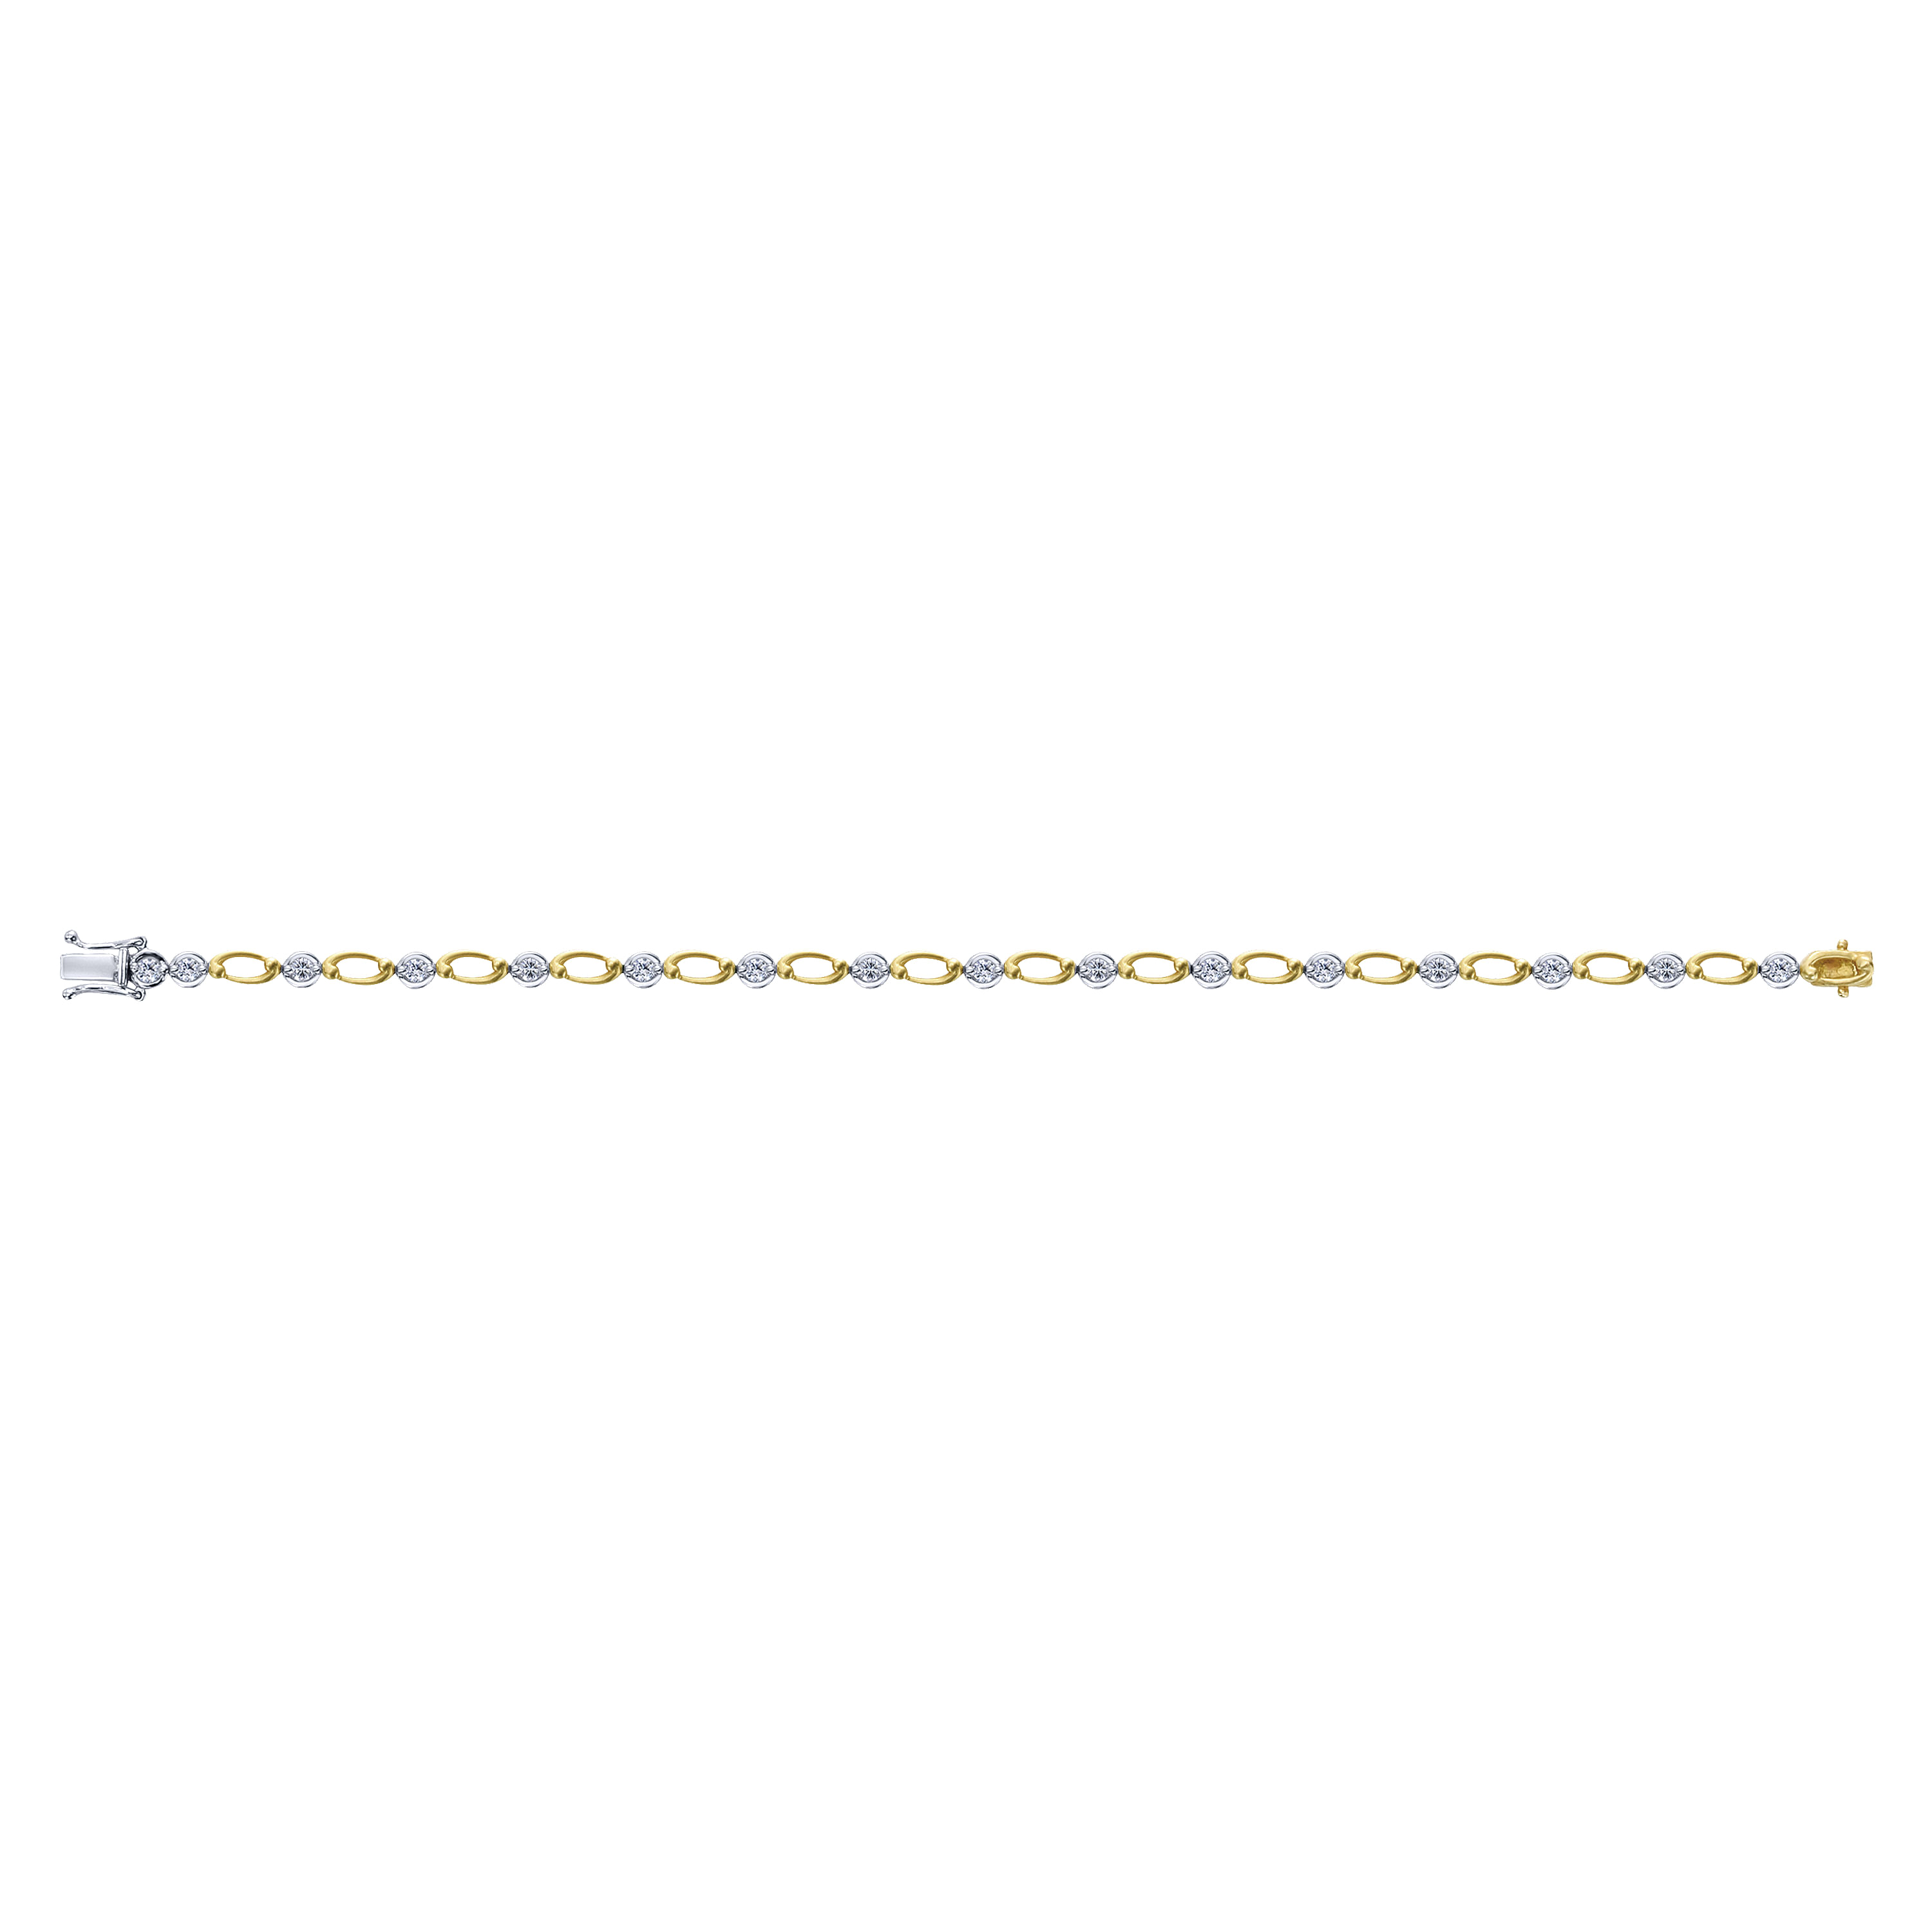 14K Yellow and White Gold Bracelet with Round Diamonds and Gold Ovals